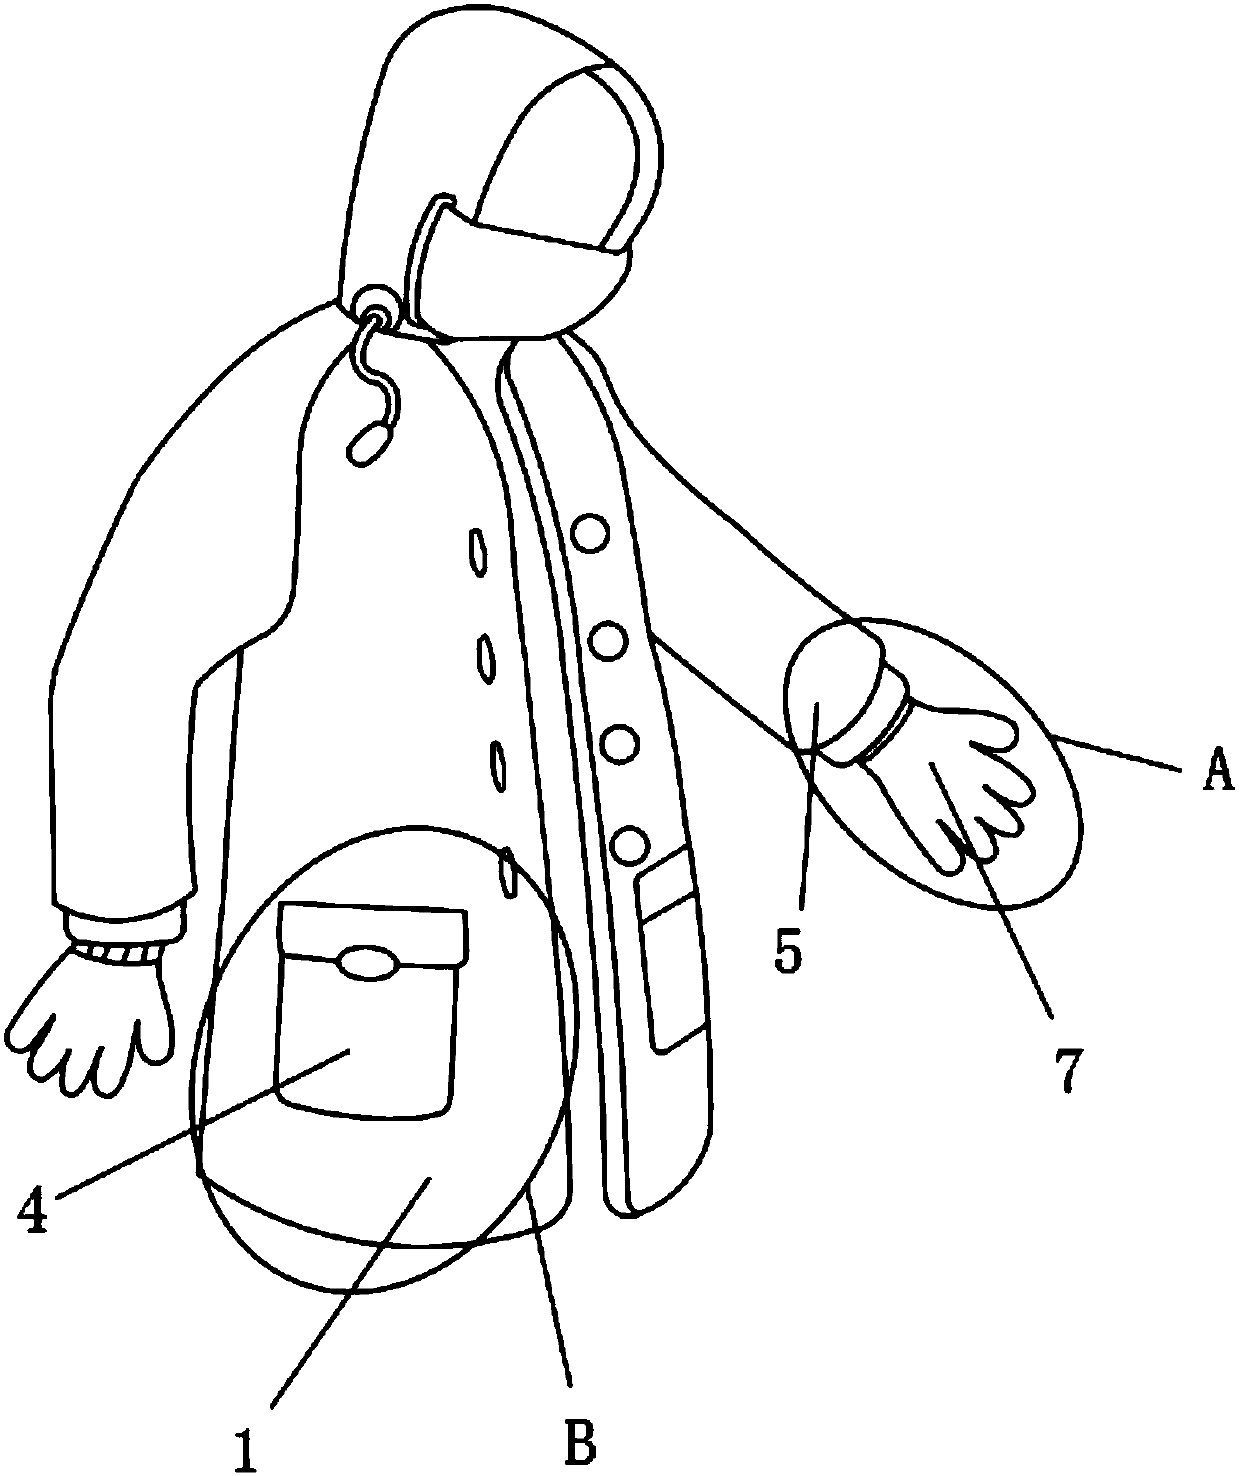 Cold-proof suit for motorcycle